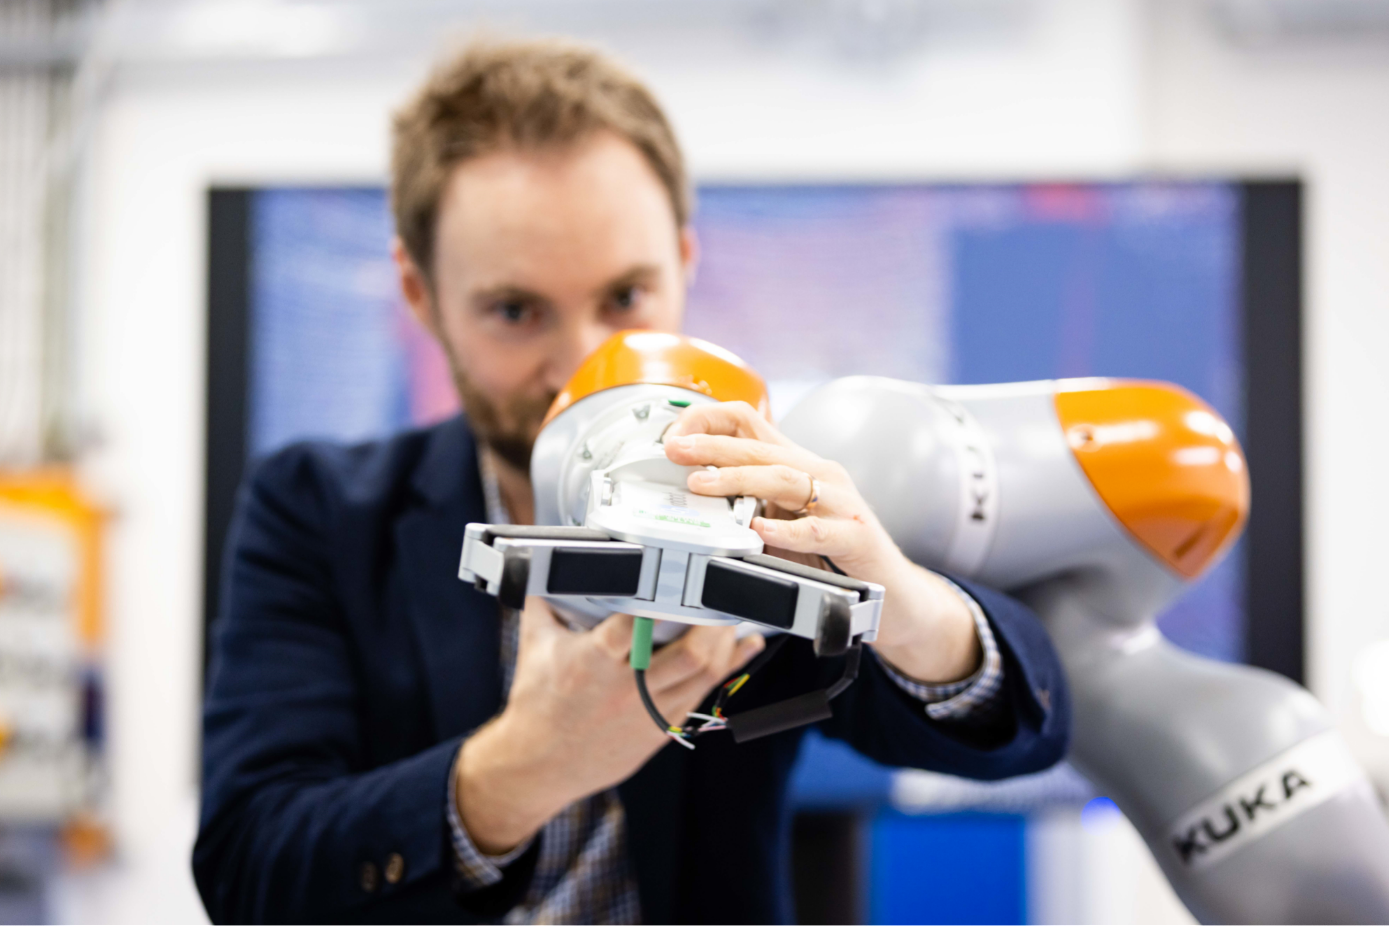 ARTICLE: Can we Unlock the Potential of Collaborative Robots?